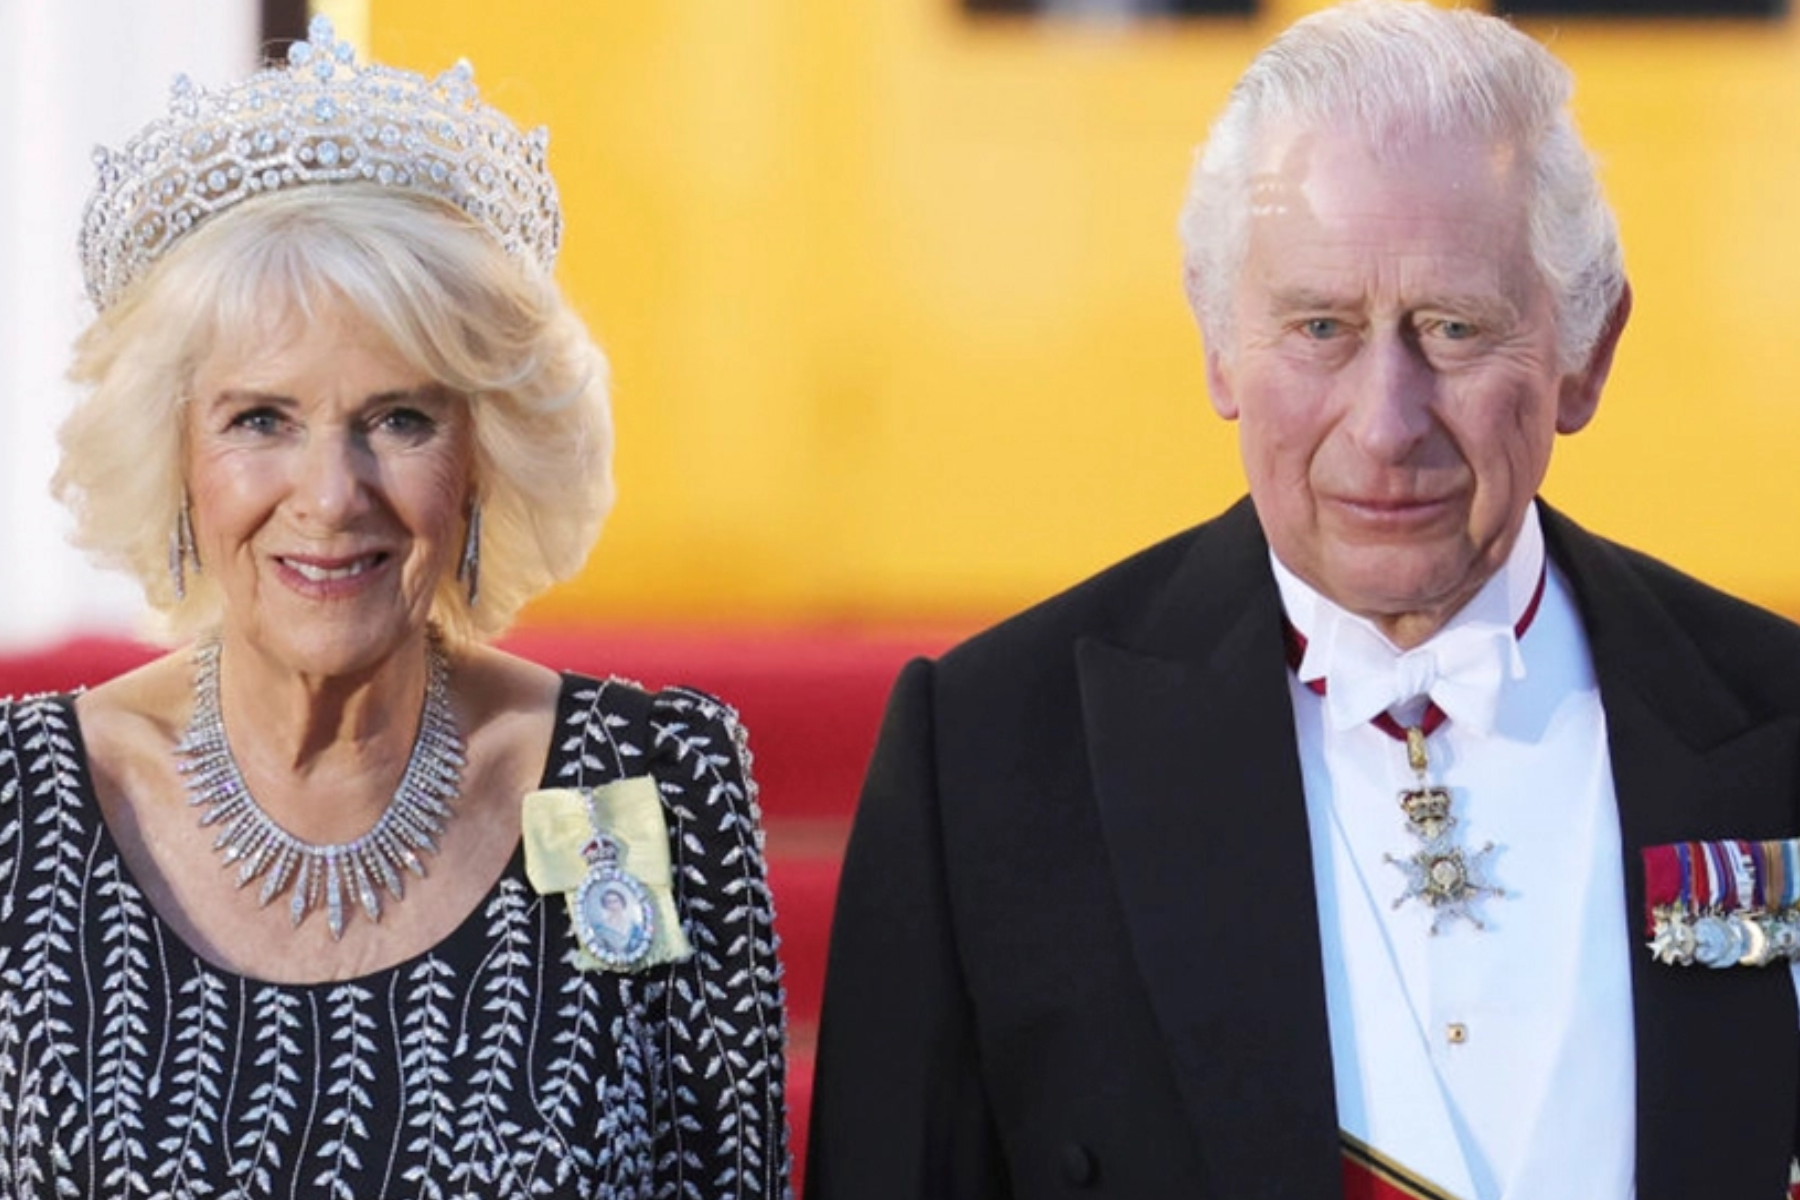 Camilla Wore Queen Elizabeth’s Diamond Necklace And The Greville Tiara At A State Banquet In Berlin